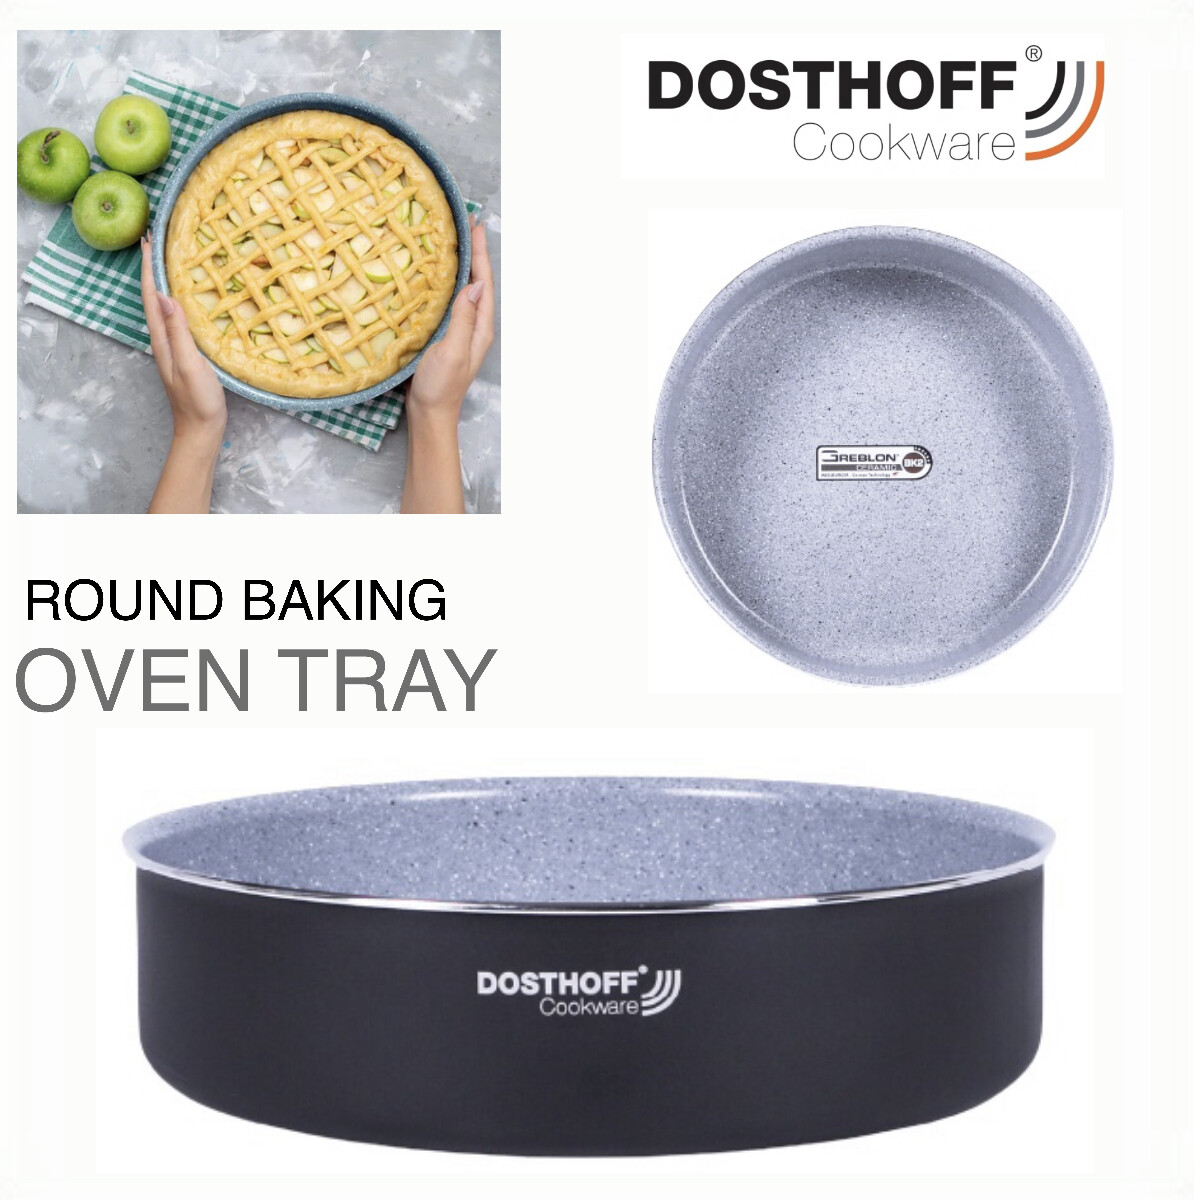 DOSTHOFF Oven Tray